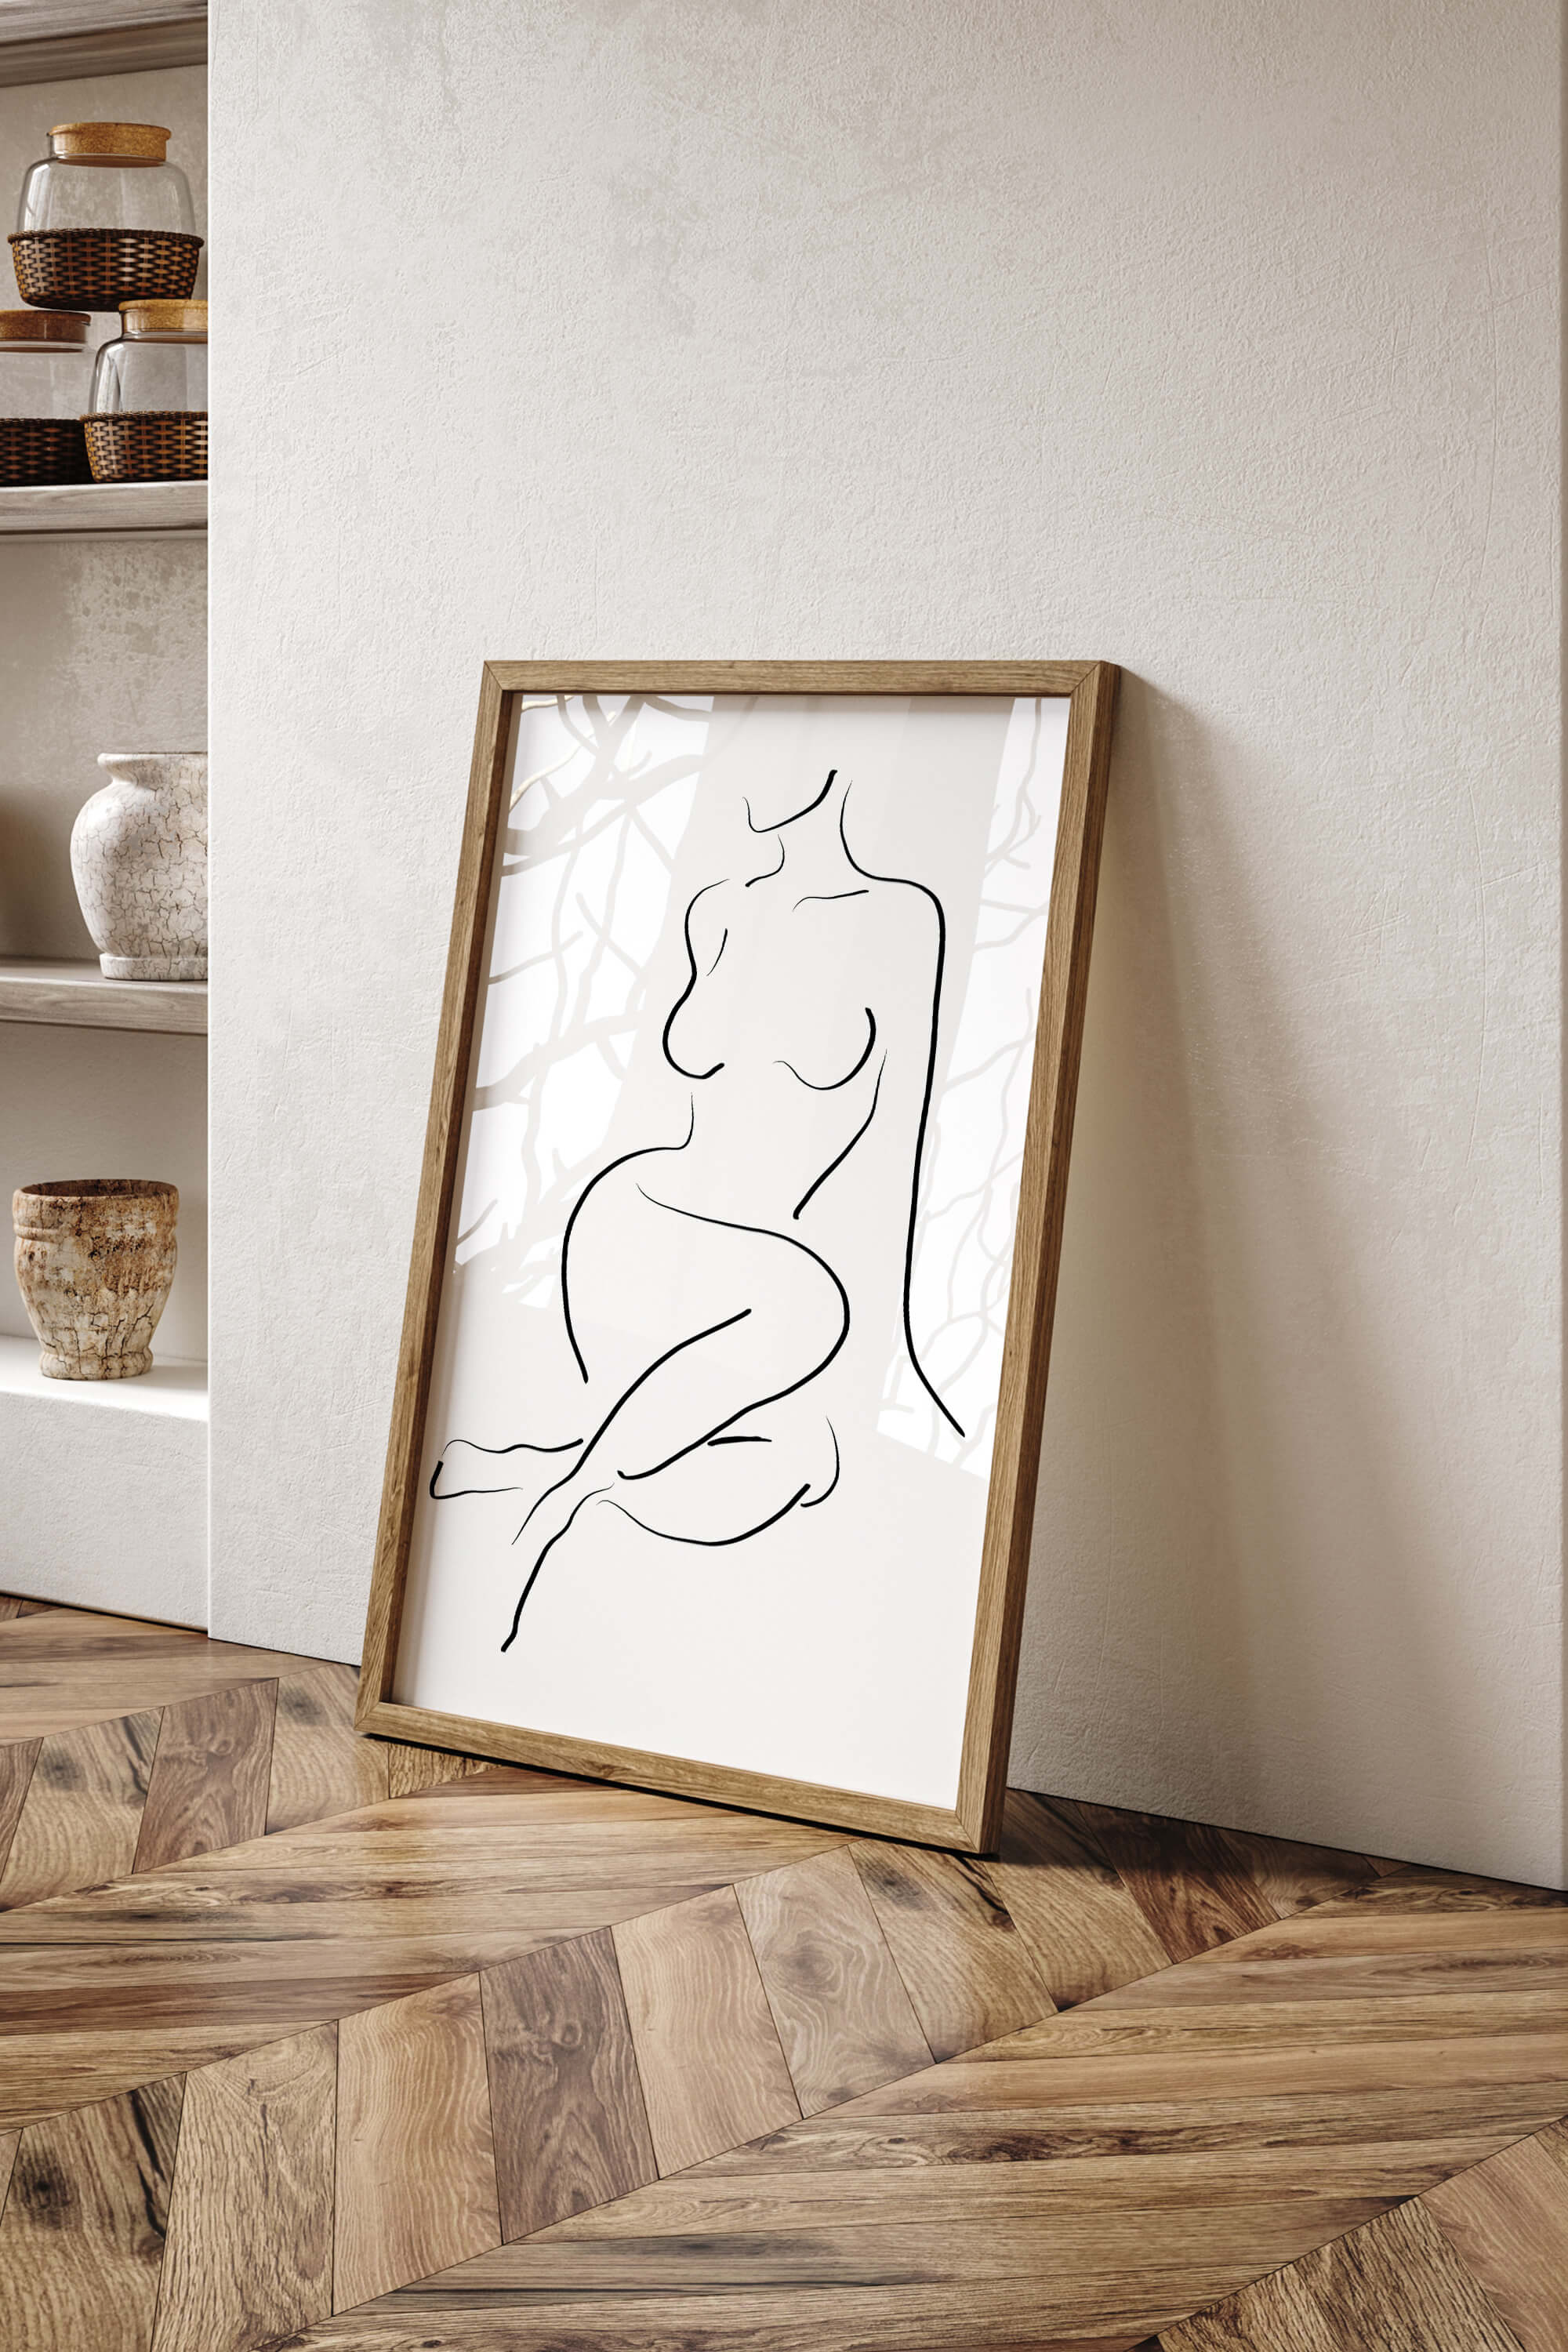 Elegant nude woman poster that redefines your living space, awakening emotions and redefining style. A work of exceptional beauty with a story of sophistication whispered in every line. Limited edition art print for an exclusive touch.